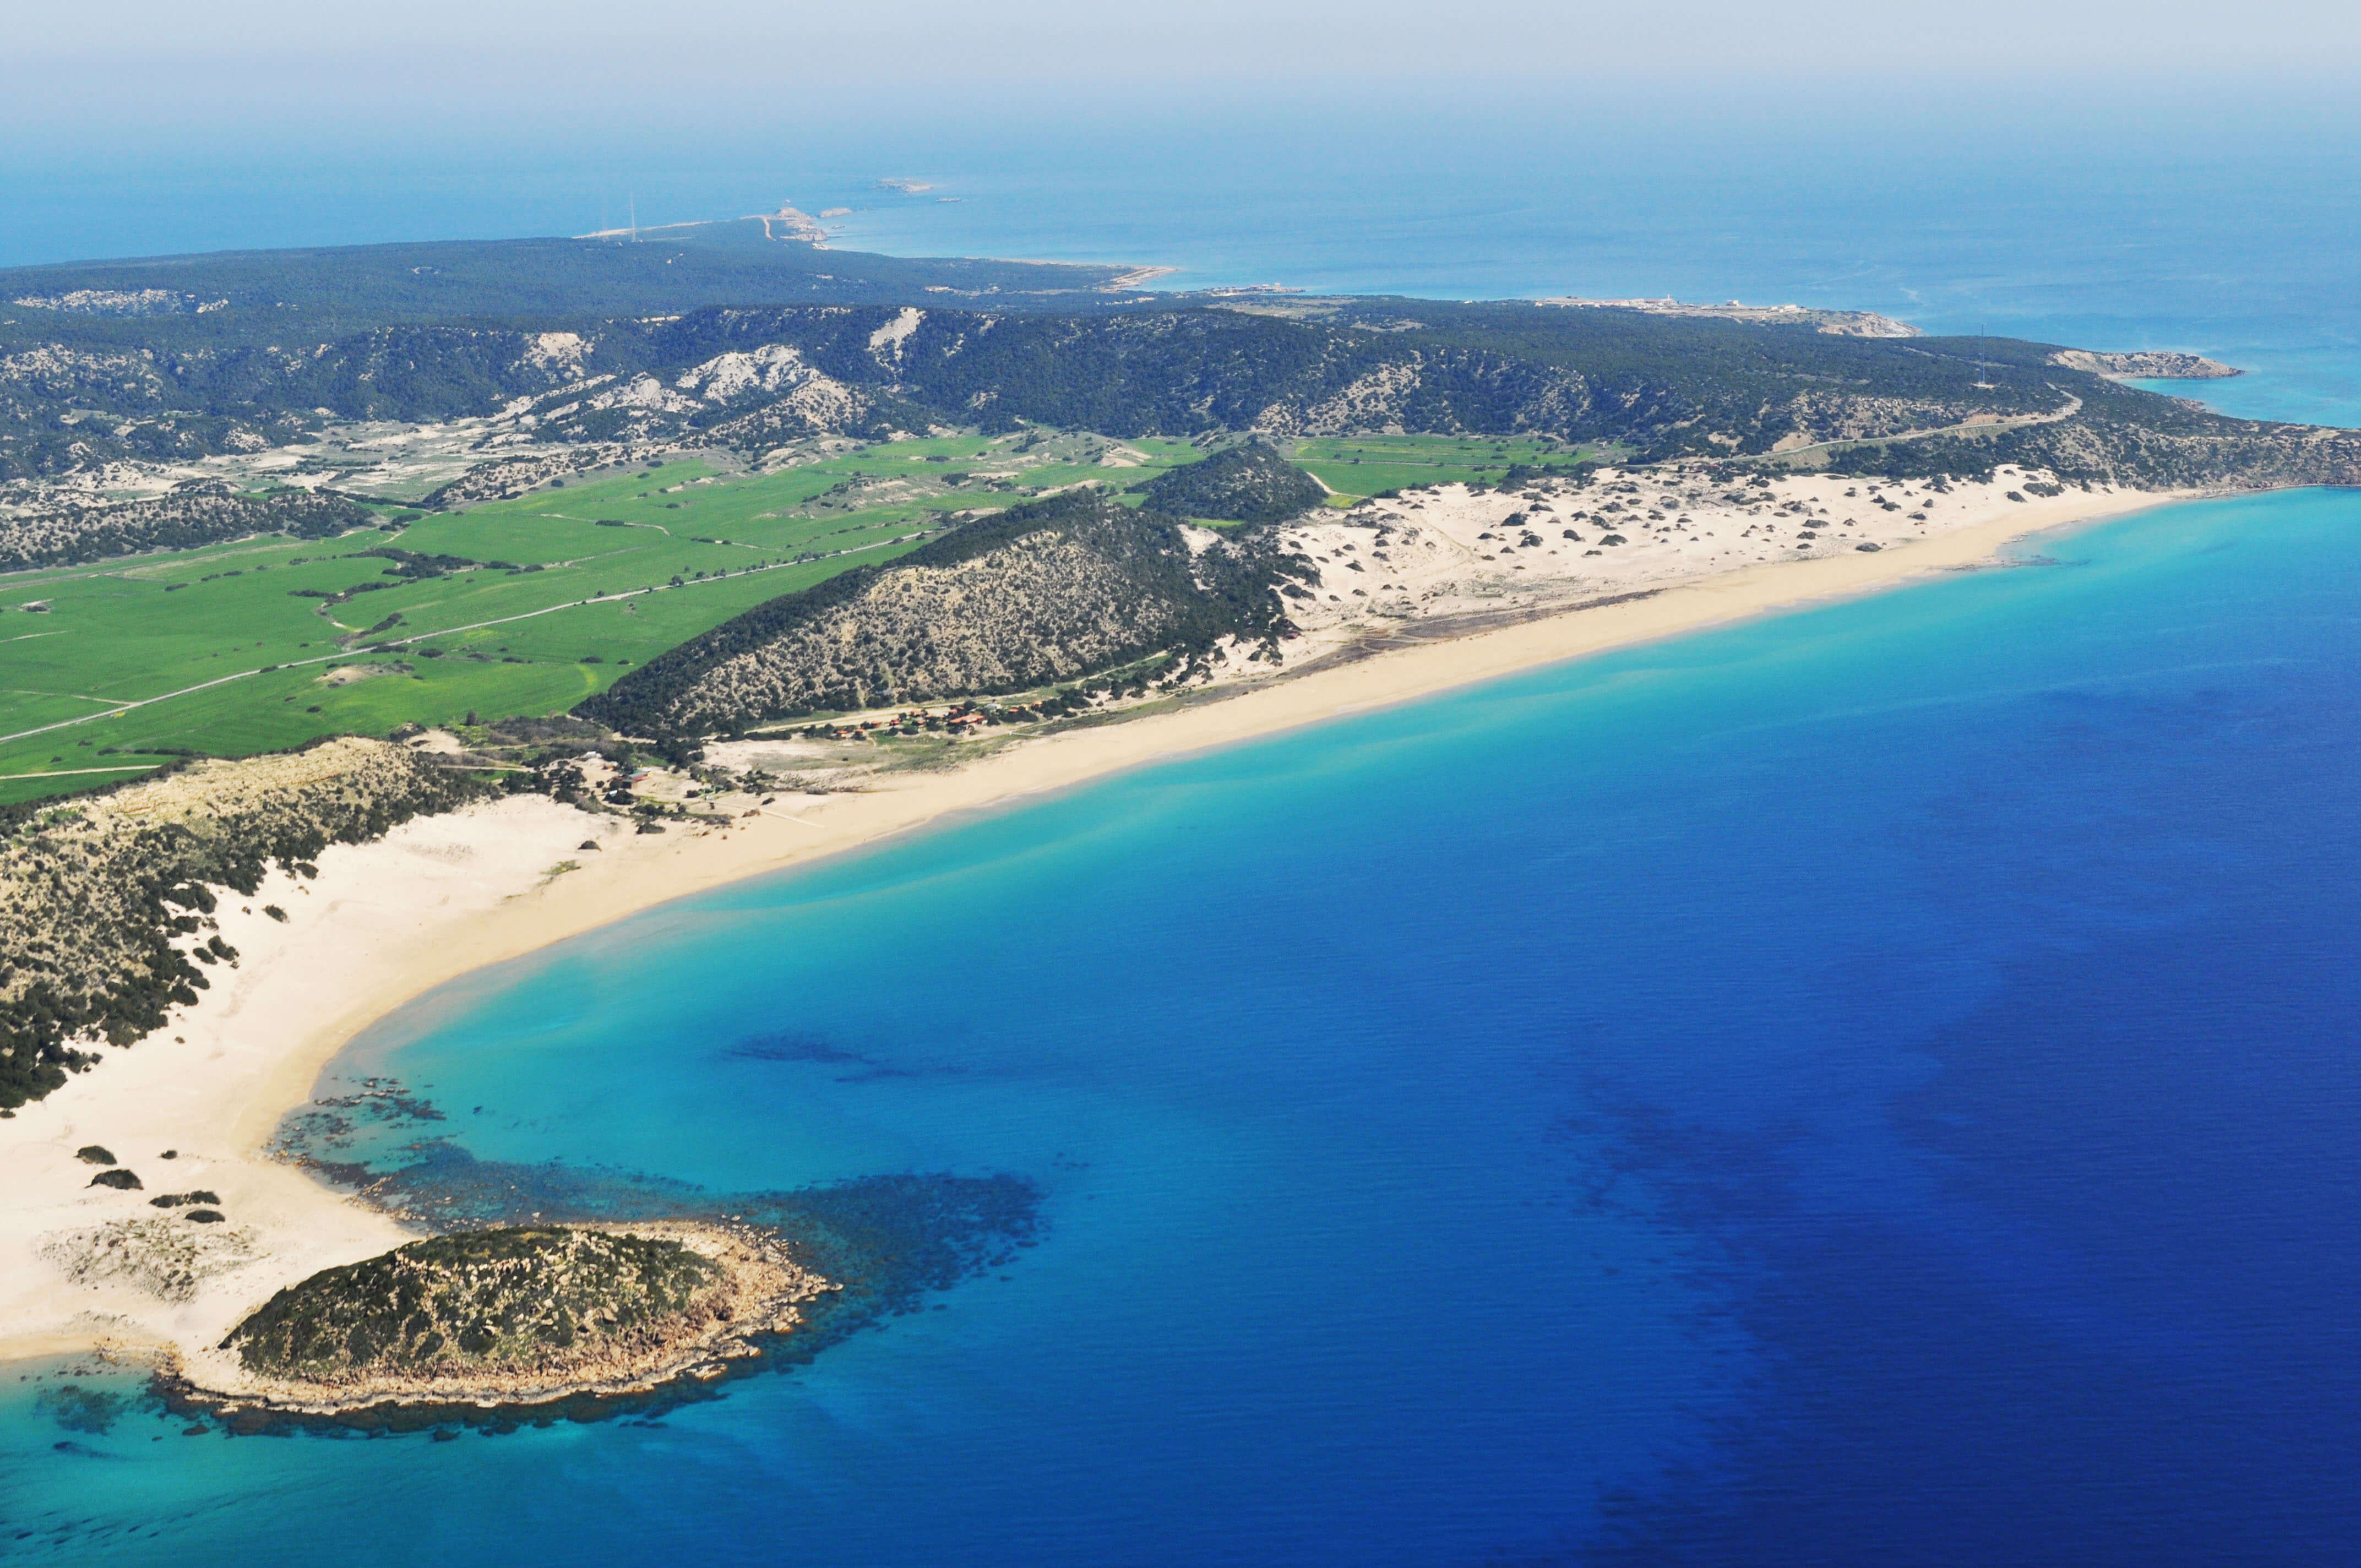 The Karpaz Peninsula is home to a host of hidden white-sand beaches